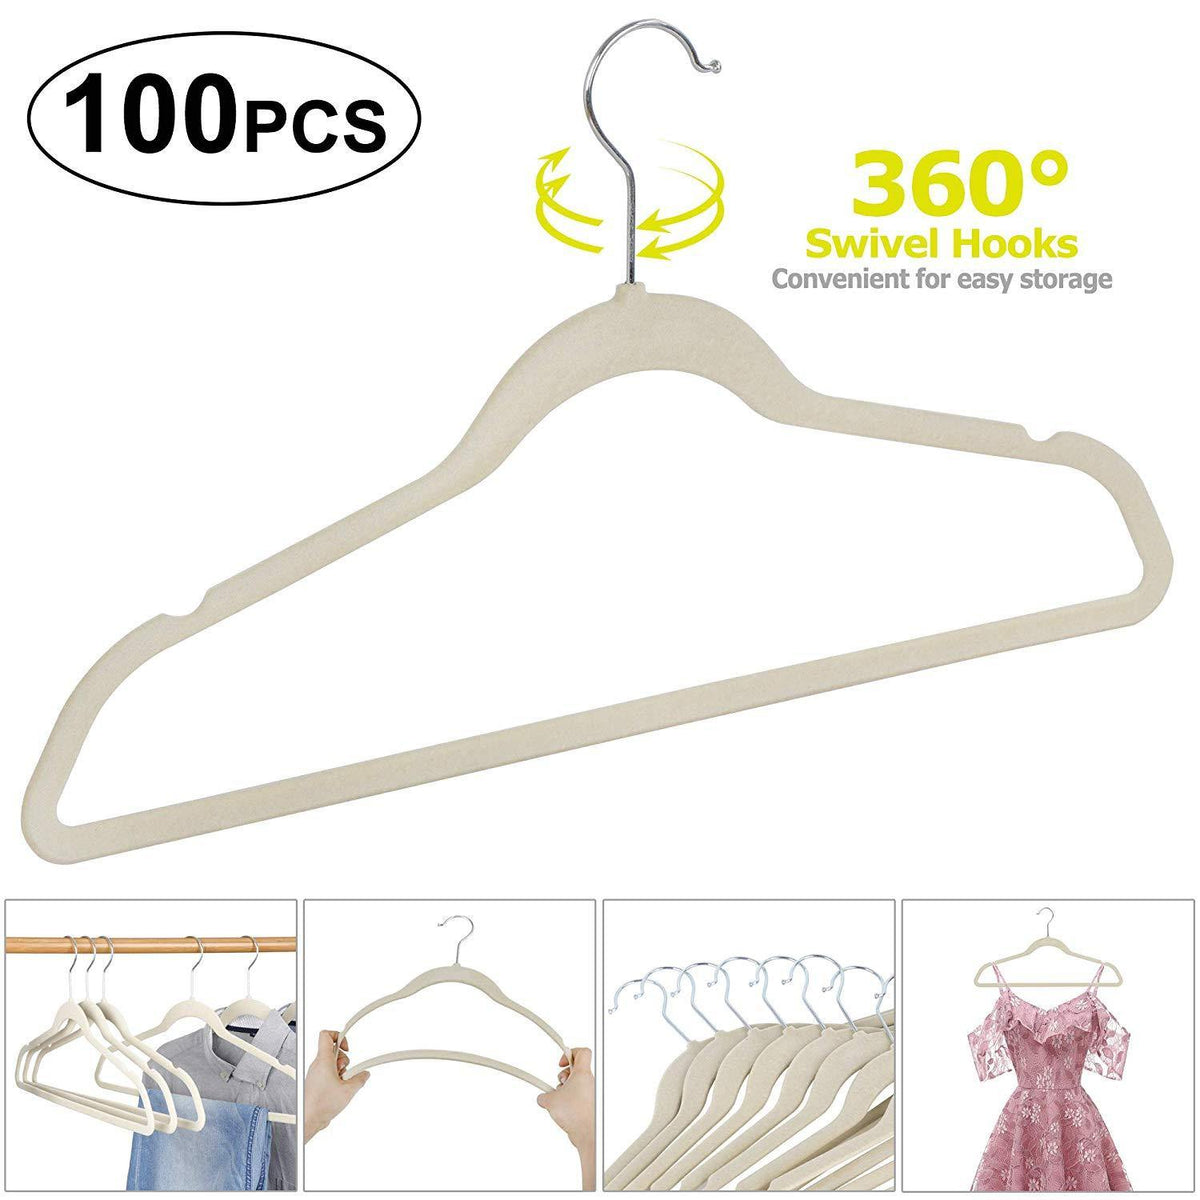 PeiQiH 10 Pack Adult Velvet Clothes Hangers, Not-Slip Notched 360 degree  Swivel Hook Ultra Thin